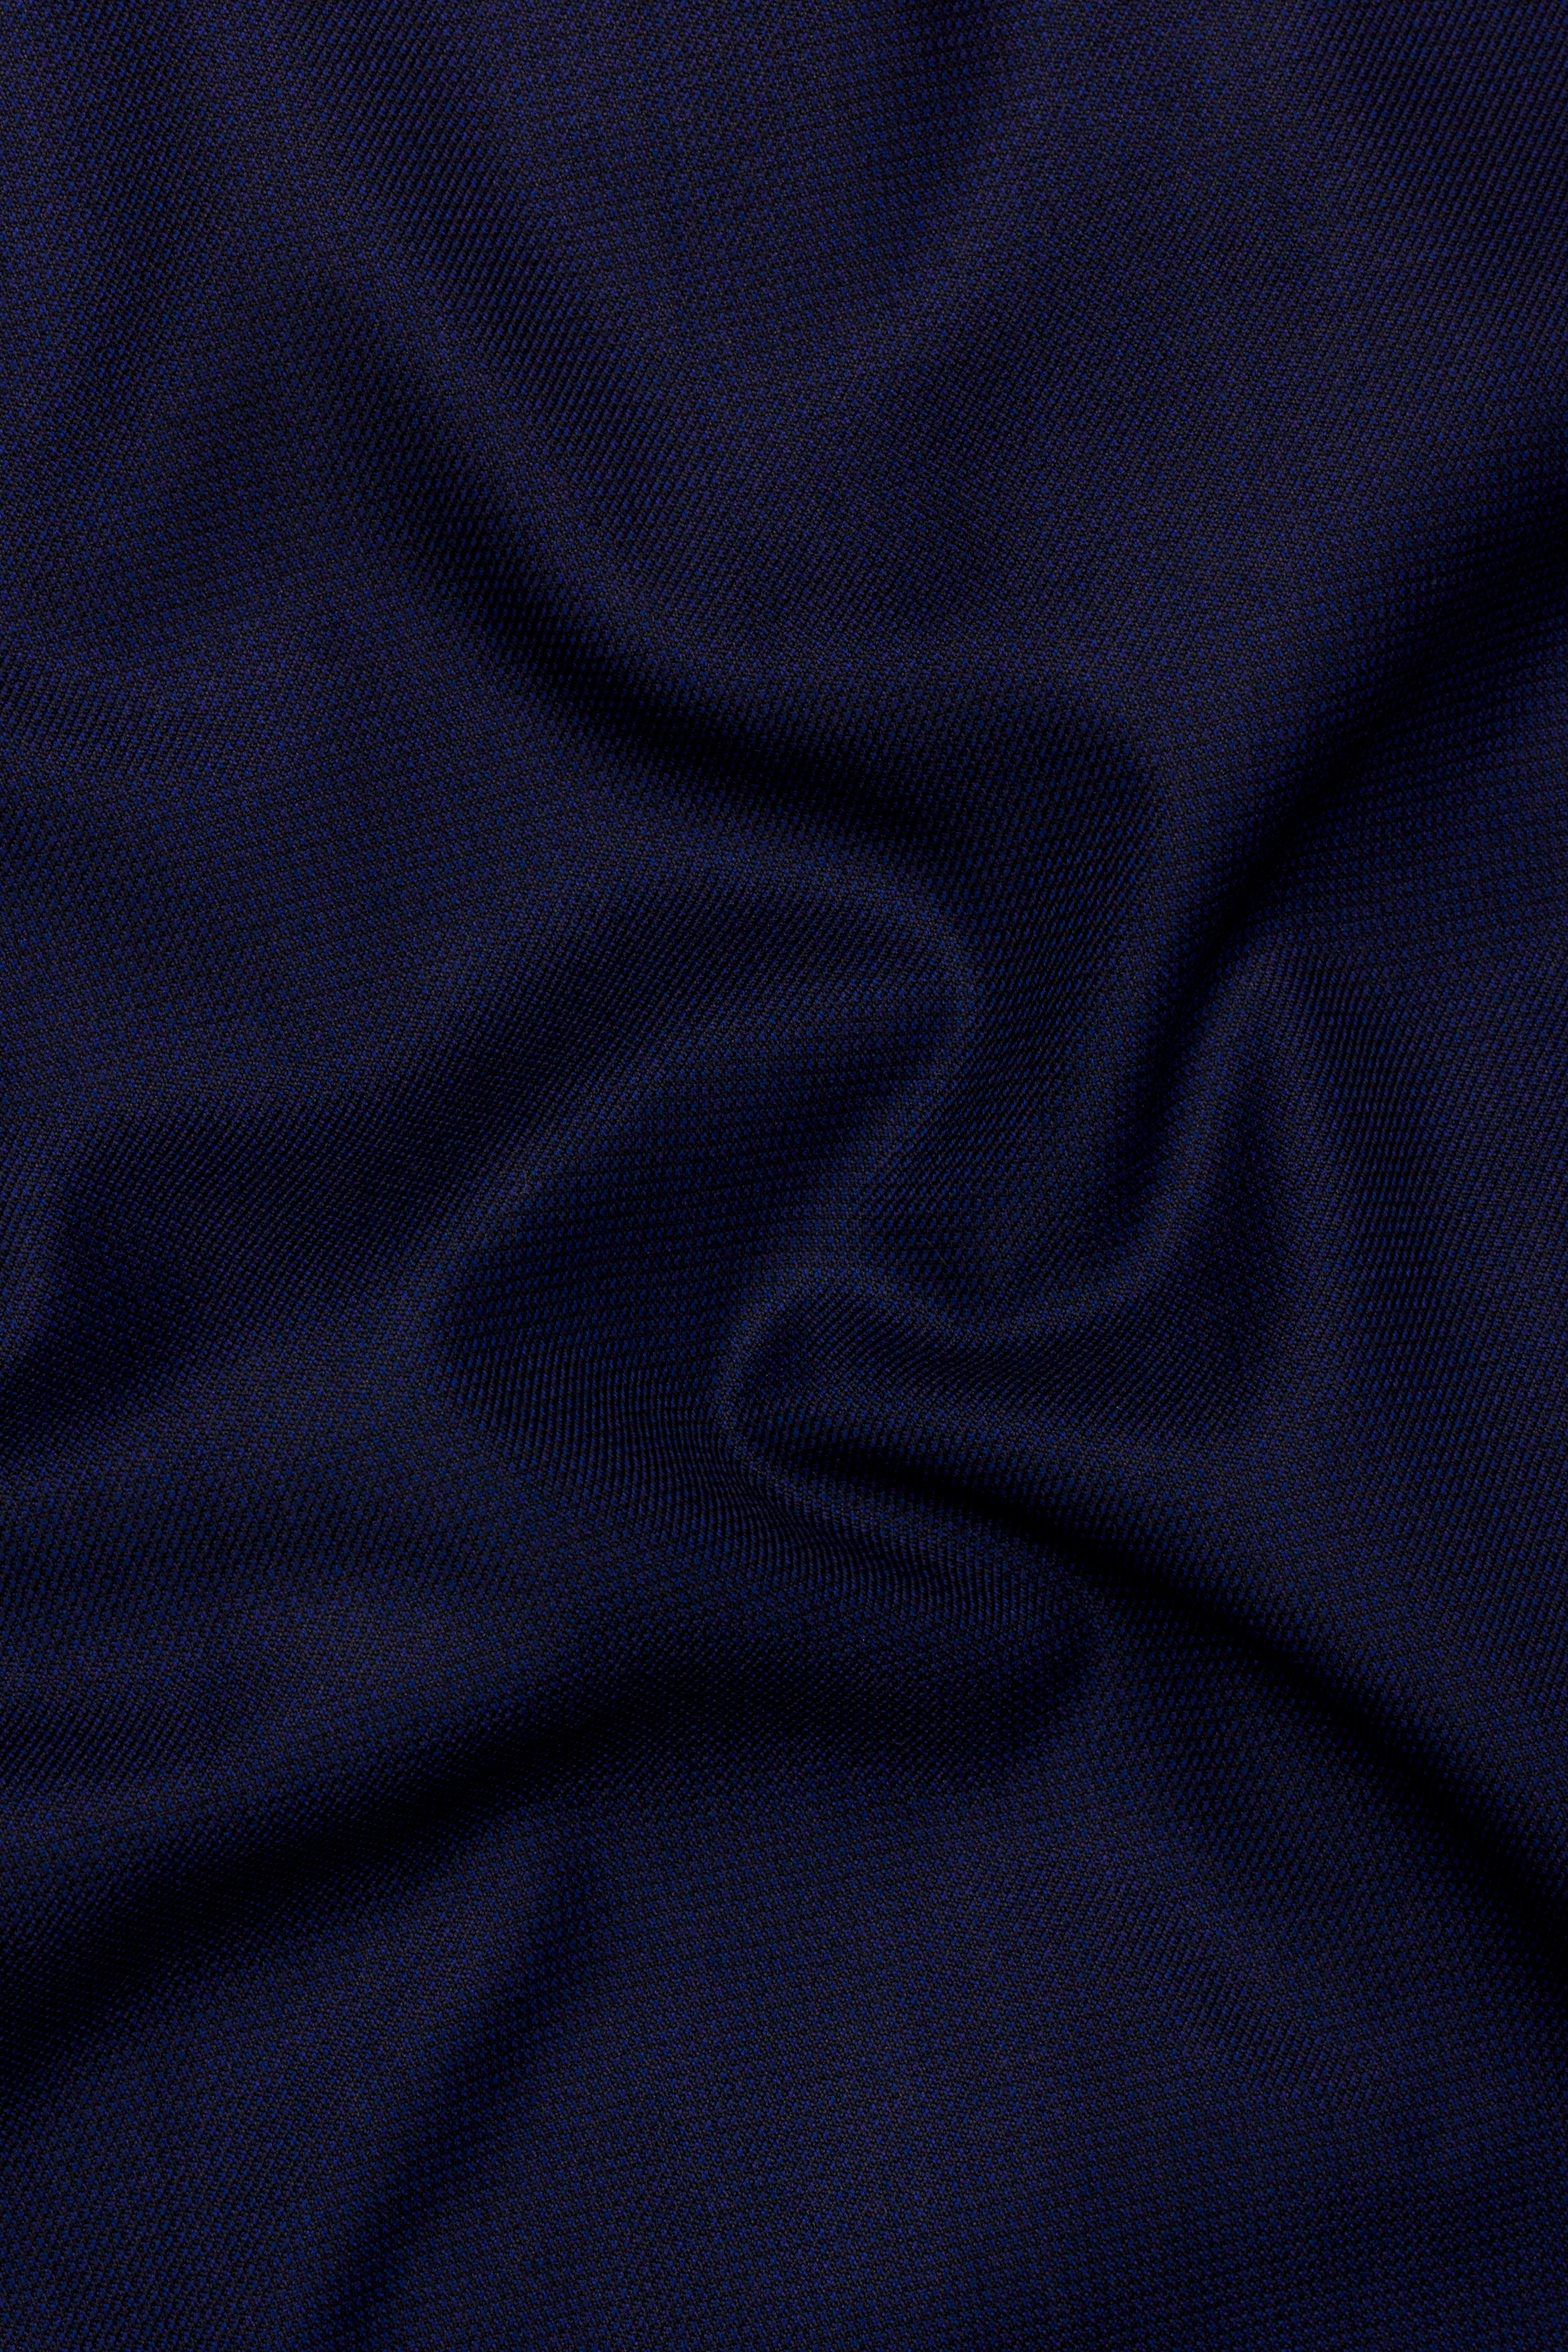 Midnight Navy Blue Wool Rich Single Breasted Suit ST2753-SB-36,ST2753-SB-38,ST2753-SB-40,ST2753-SB-42,ST2753-SB-44,ST2753-SB-46,ST2753-SB-48,ST2753-SB-50,ST2753-SB-52,ST2753-SB-54,ST2753-SB-56,ST2753-SB-58,ST2753-SB-60